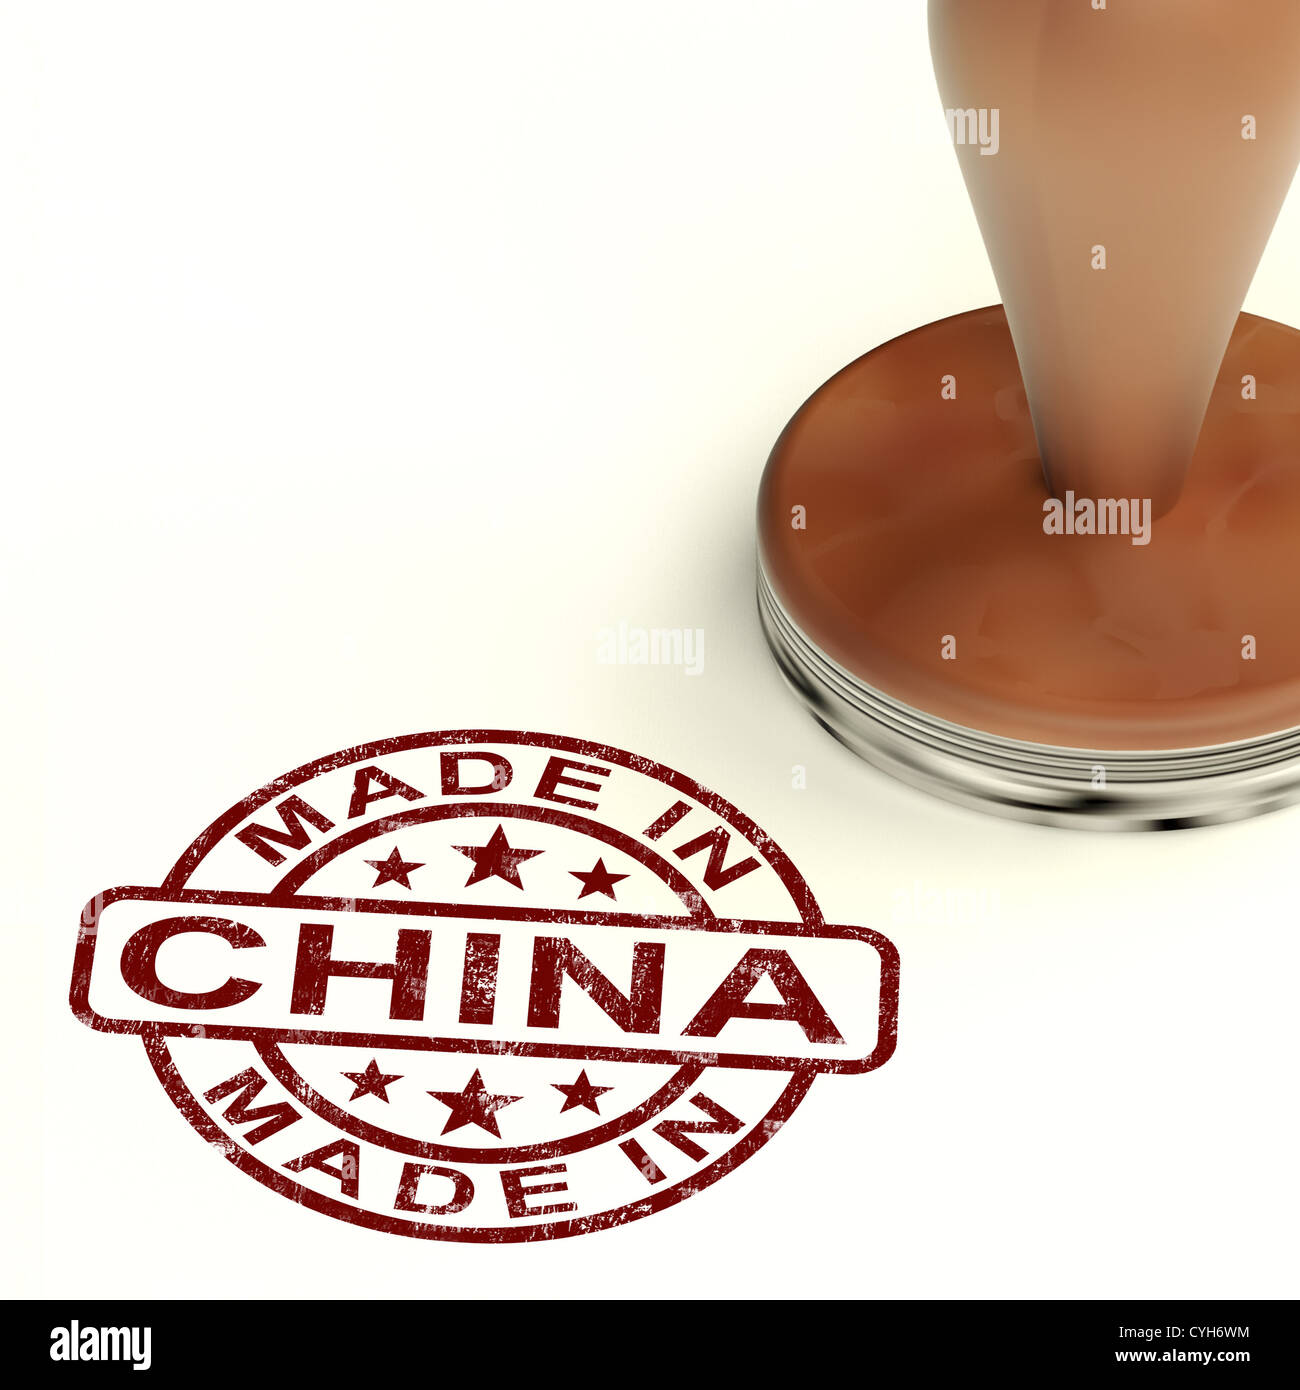 https://c8.alamy.com/comp/CYH6WM/made-in-china-stamp-shows-chinese-product-or-produce-CYH6WM.jpg